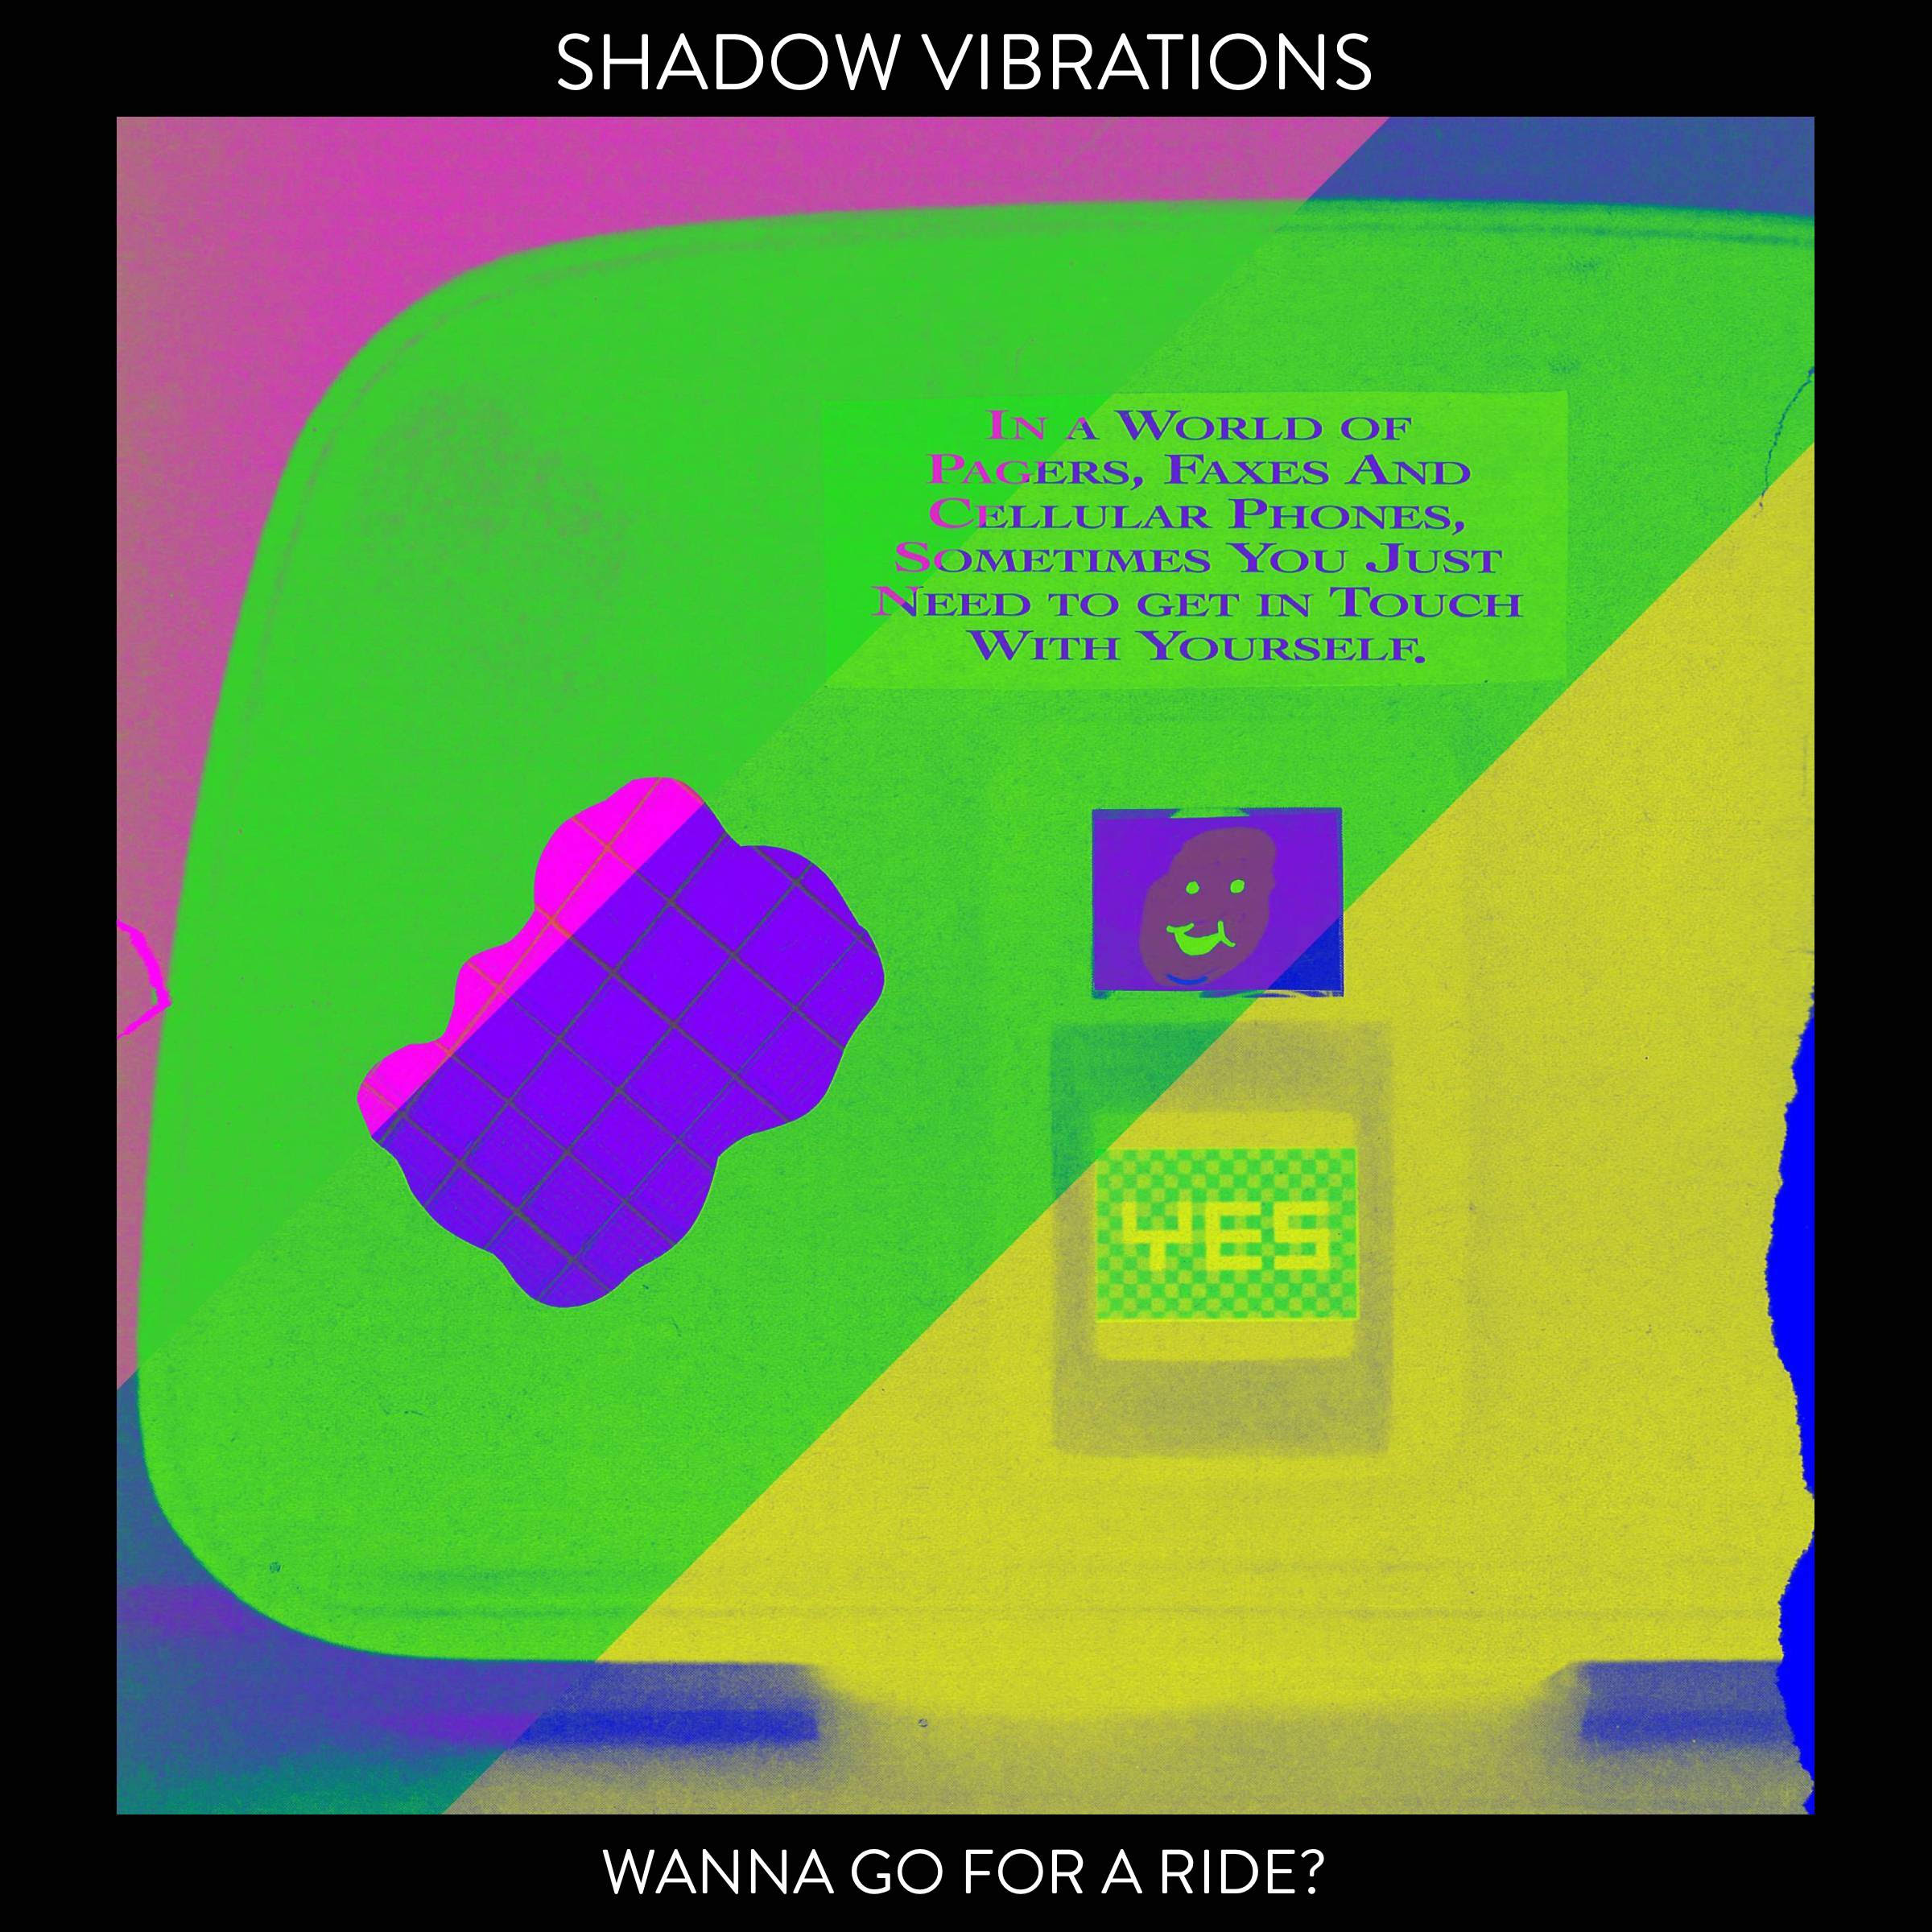 Art for WANNA GO FOR A RIDE? by Shadow Vibrations